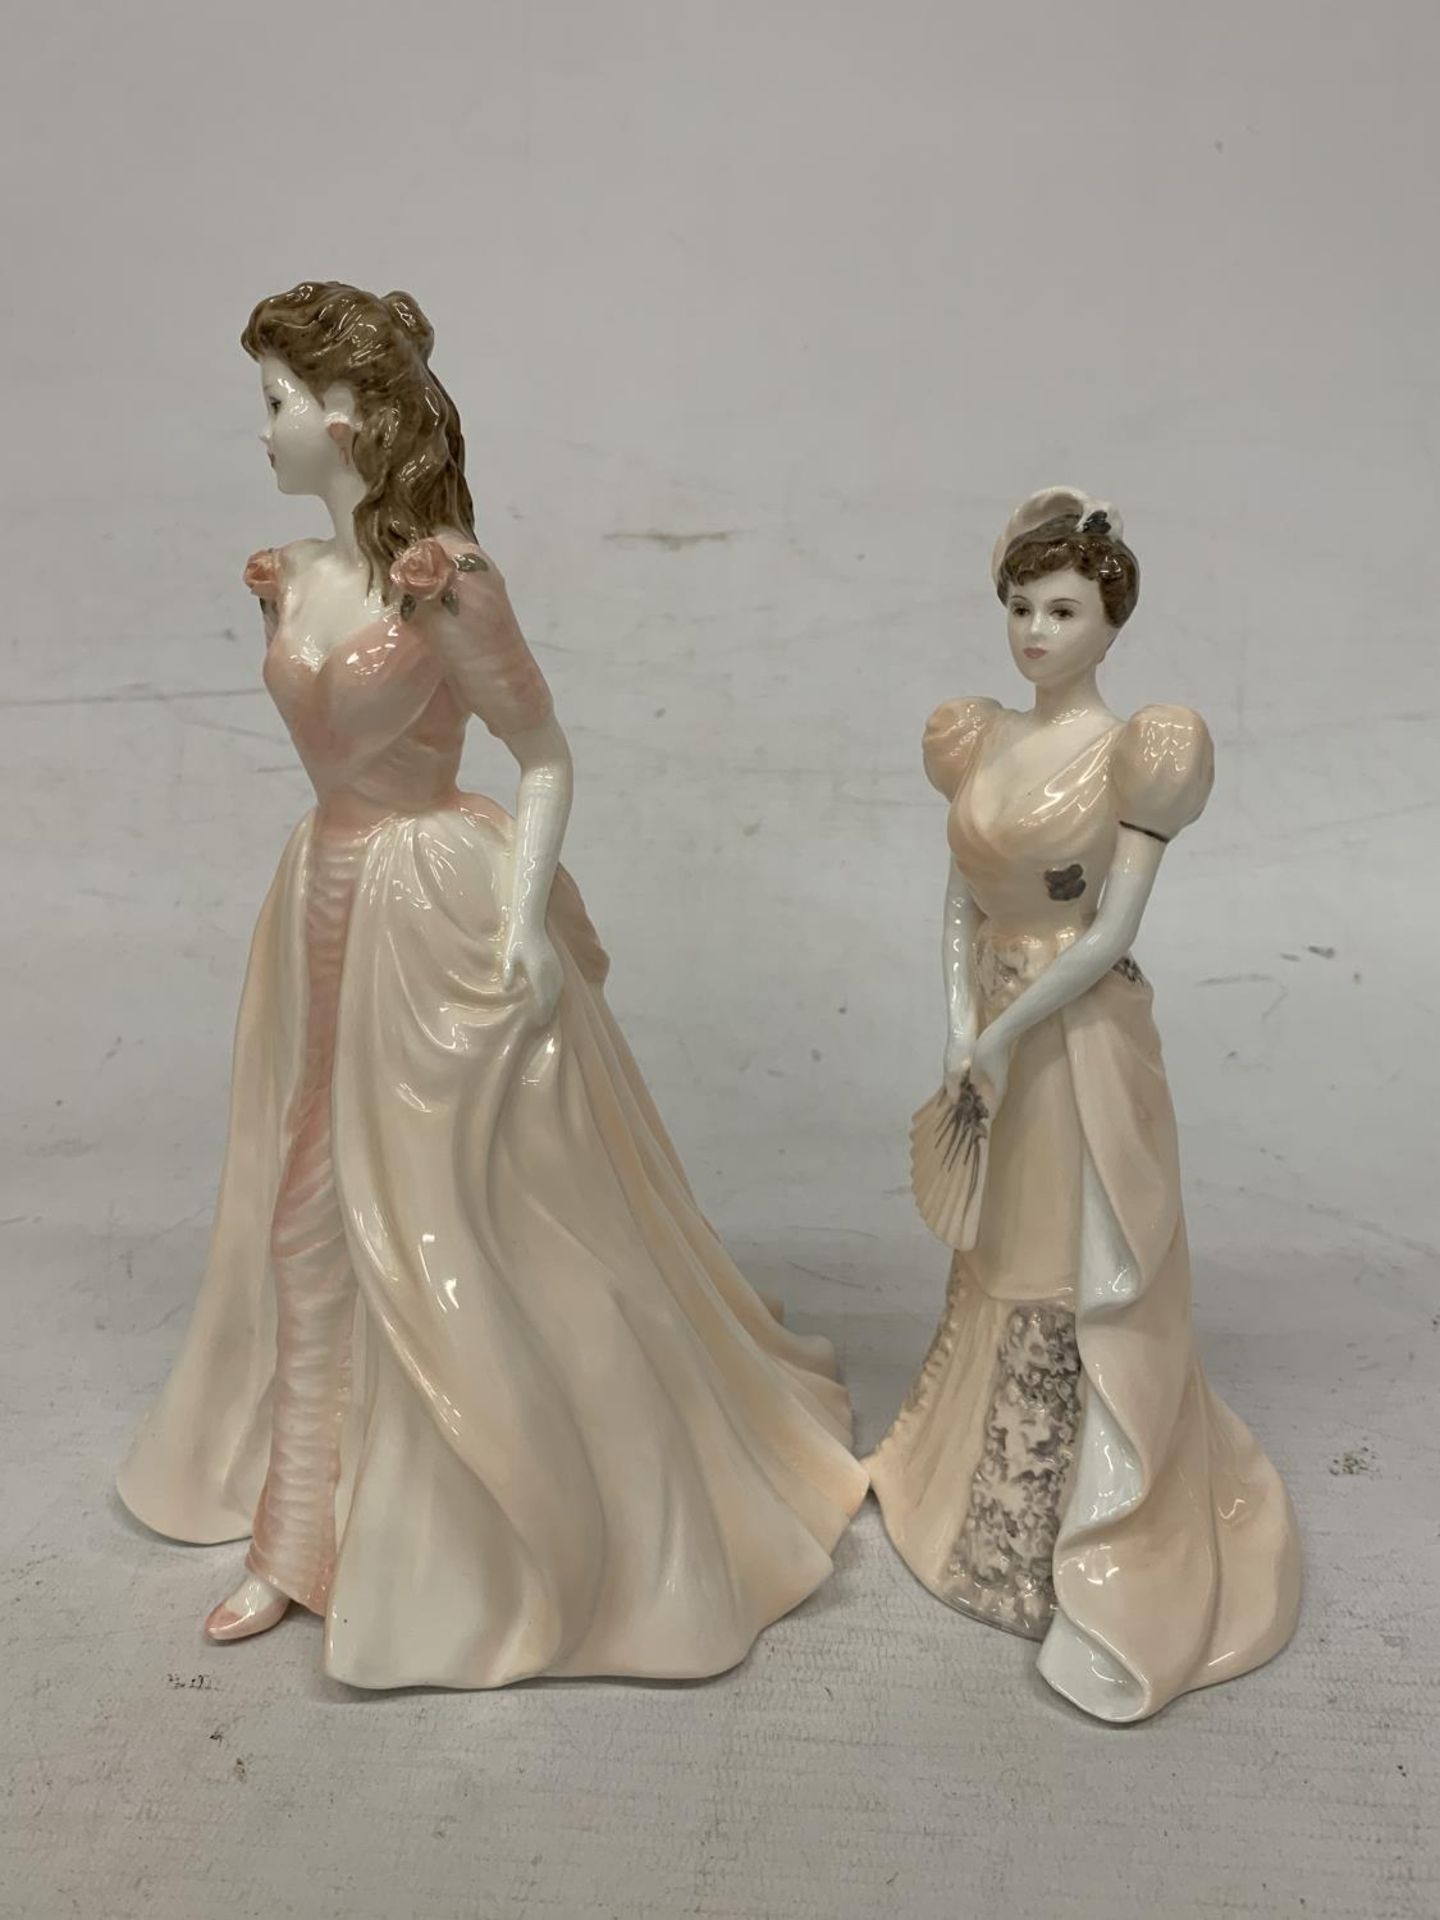 TWO COALPORT FIGURES - CHANTILLY LACE "VELVET" AND JACQUELINE FROM THE LADIES OF FASHION - Image 4 of 5